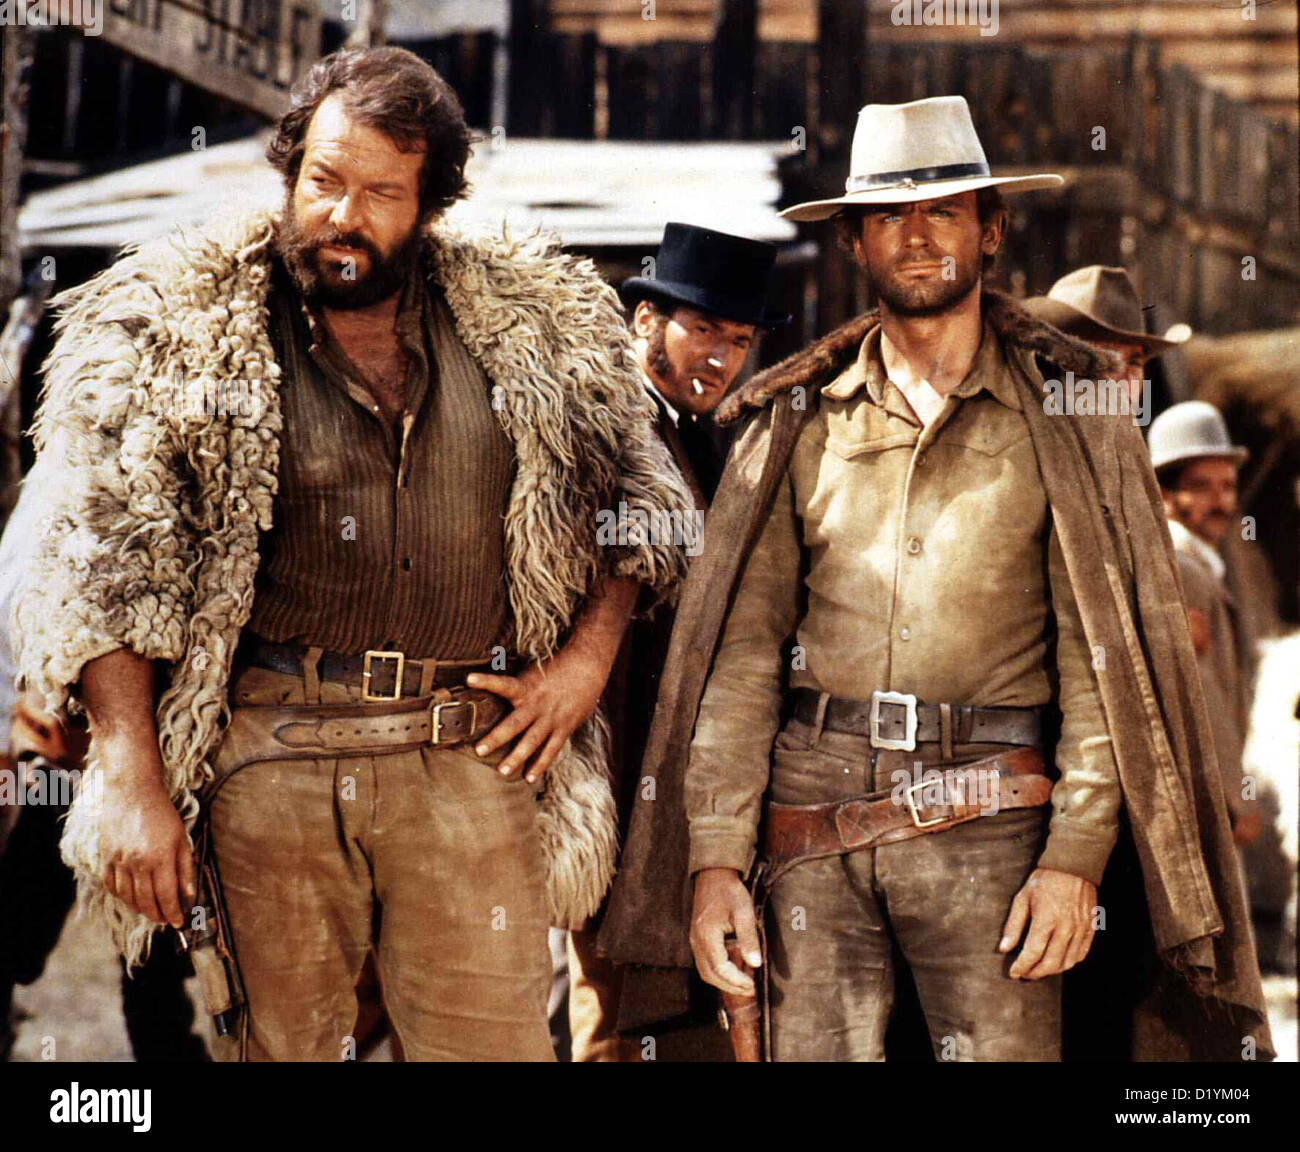 Let us take Bud Spencer and Terence Hill in the walk of fame